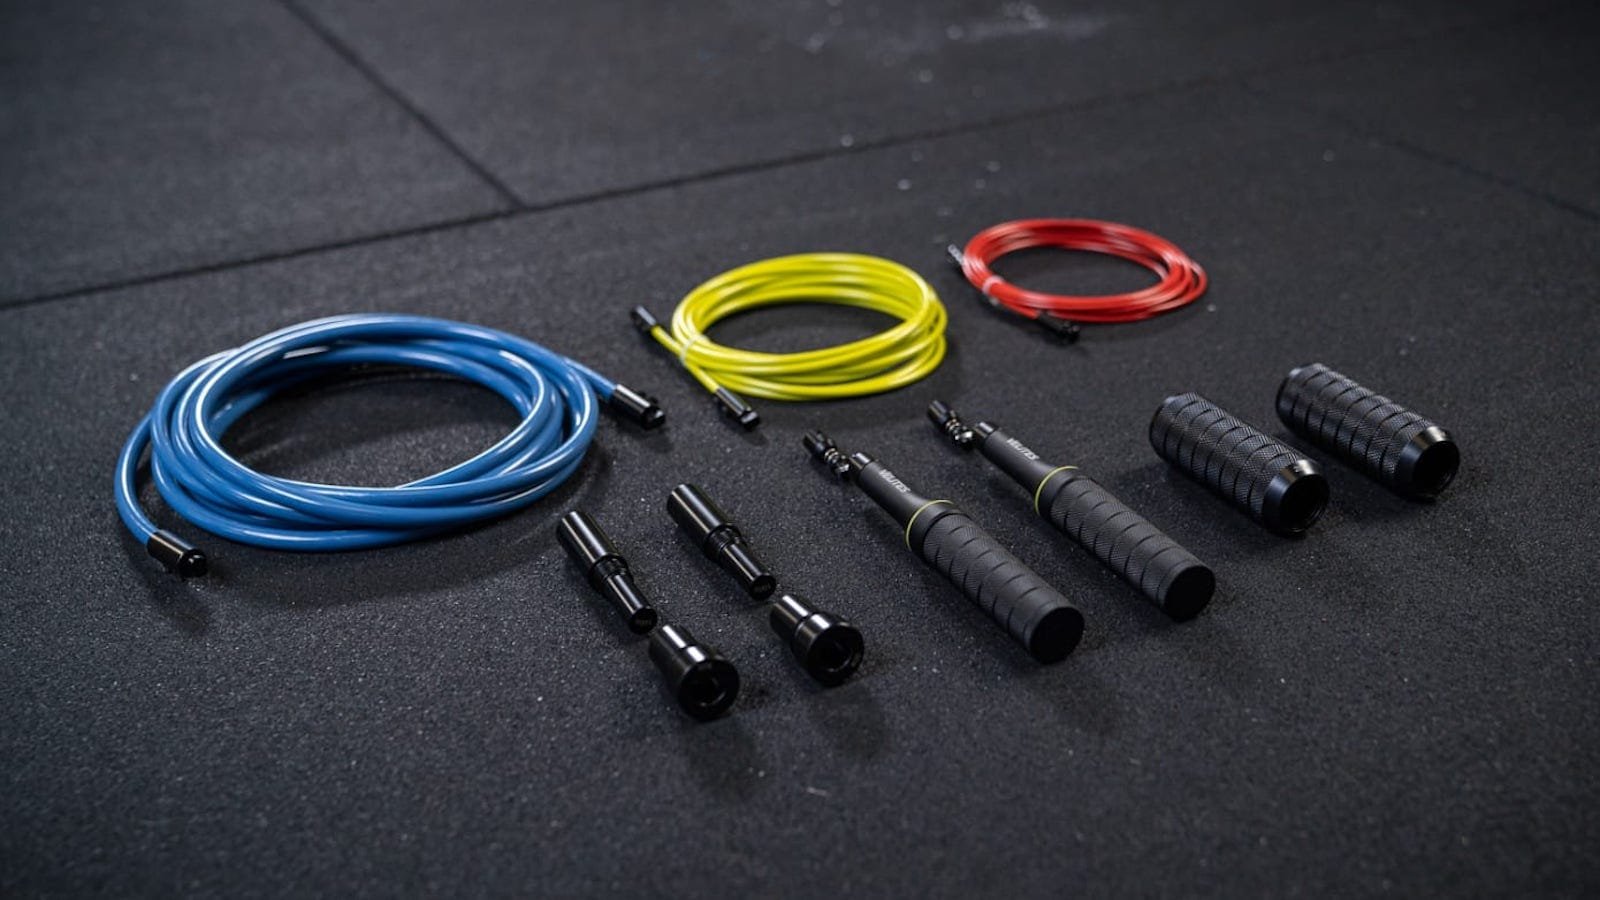 Velites Earth 2.0 jump rope fitness system offers at-home training and coaching